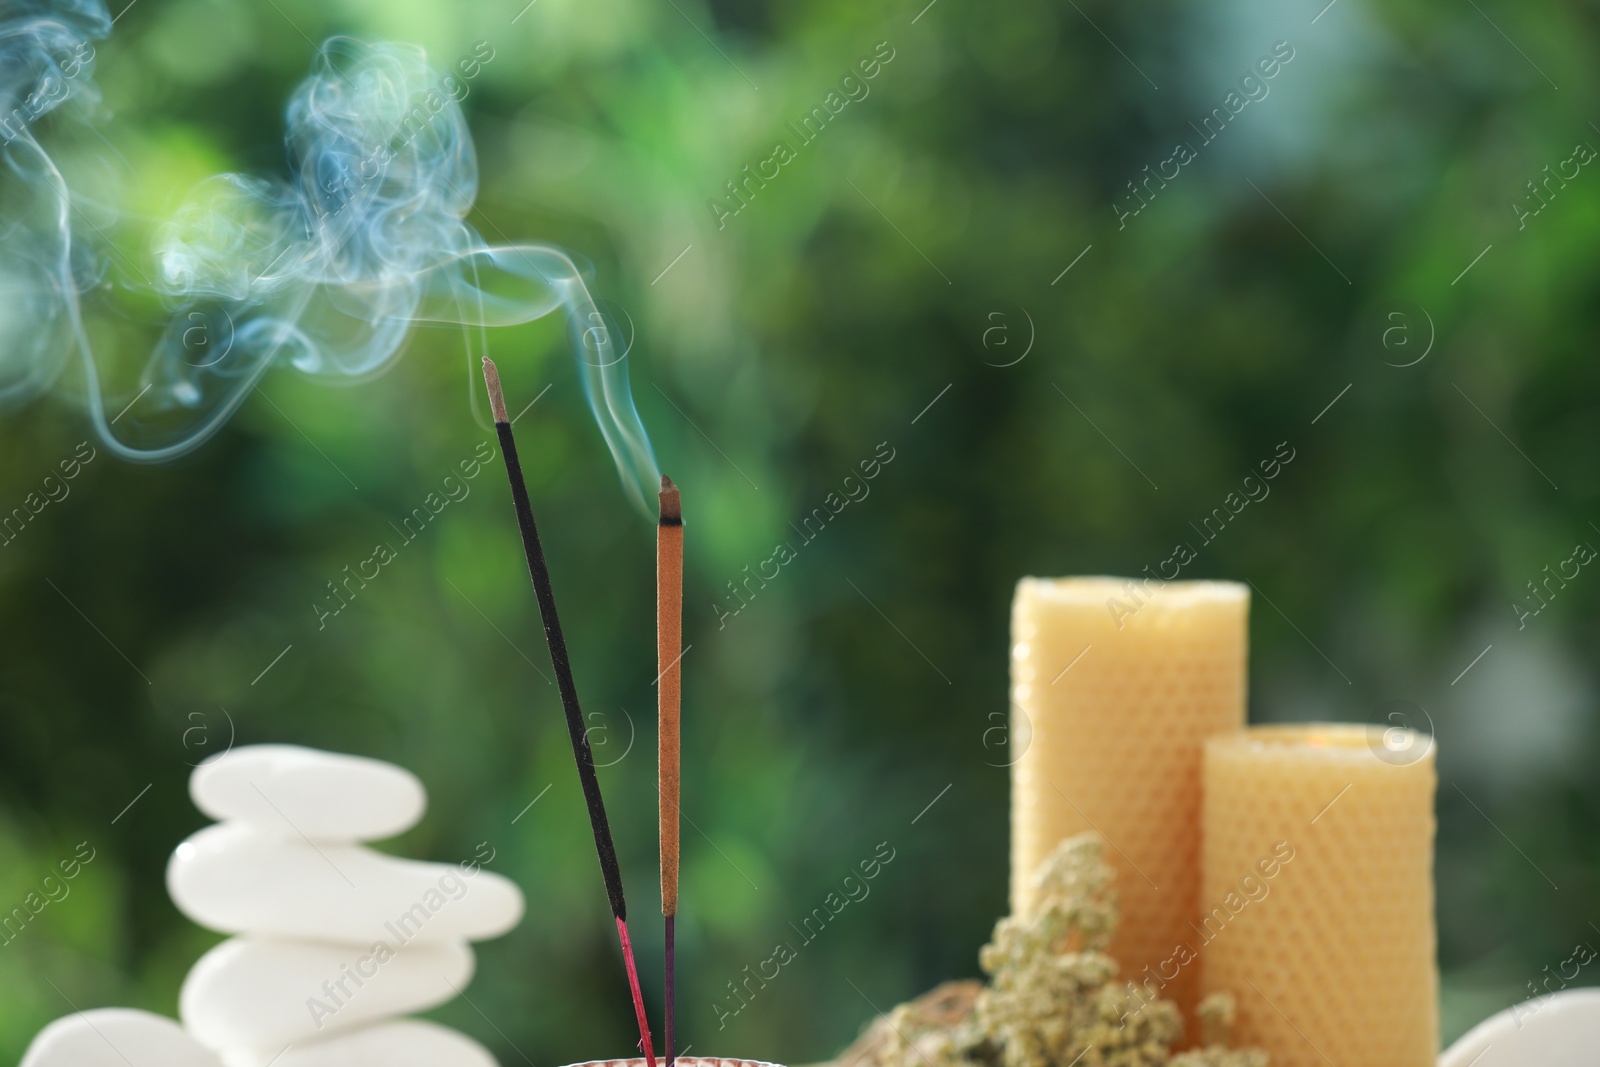 Photo of Incense sticks smoldering near stones, candles and dry flowers against green blurred background